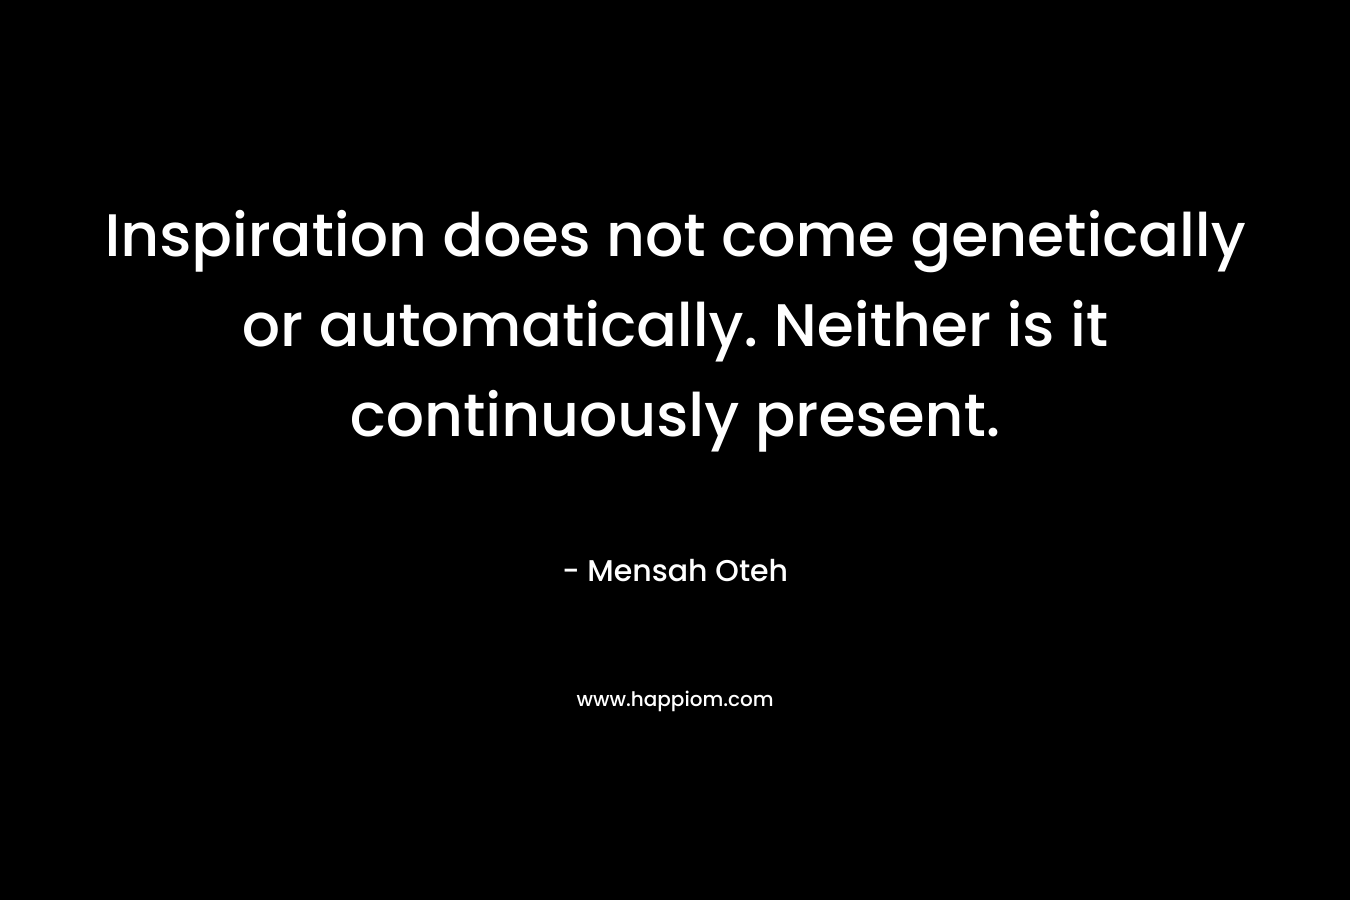 Inspiration does not come genetically or automatically. Neither is it continuously present.